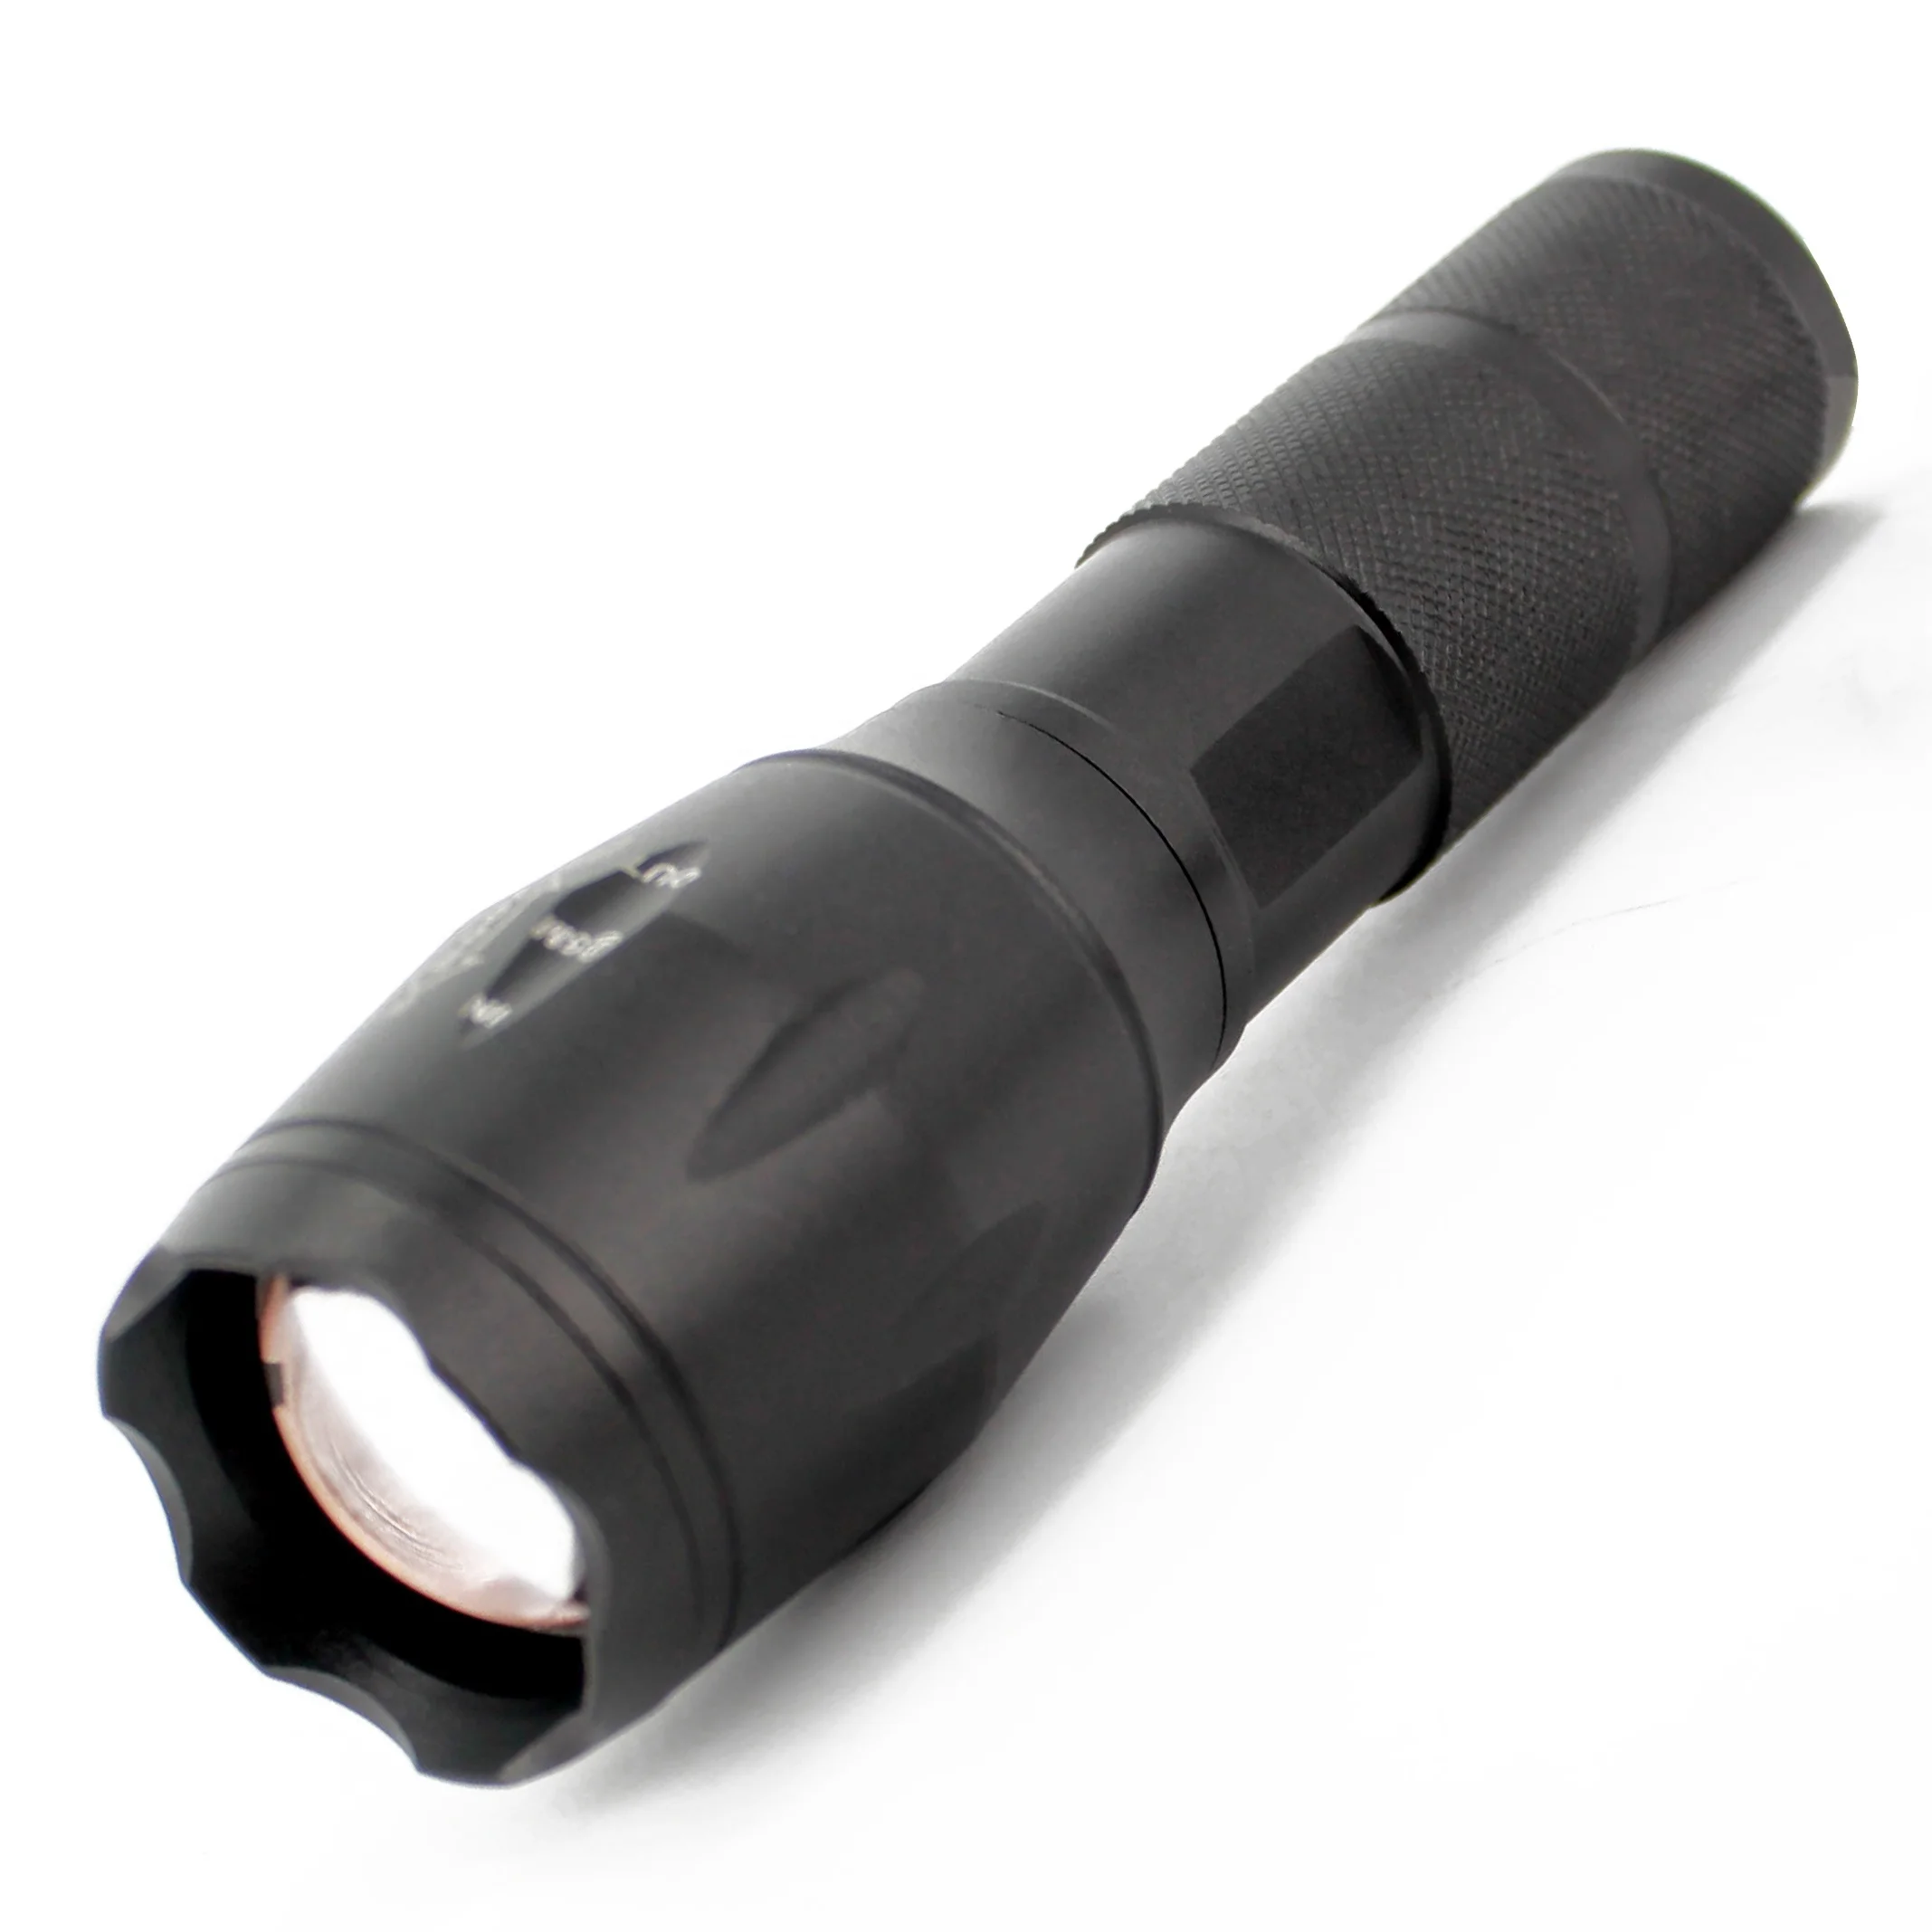 Aluminum high power rechargeable Battery handheld tactical led flashlight